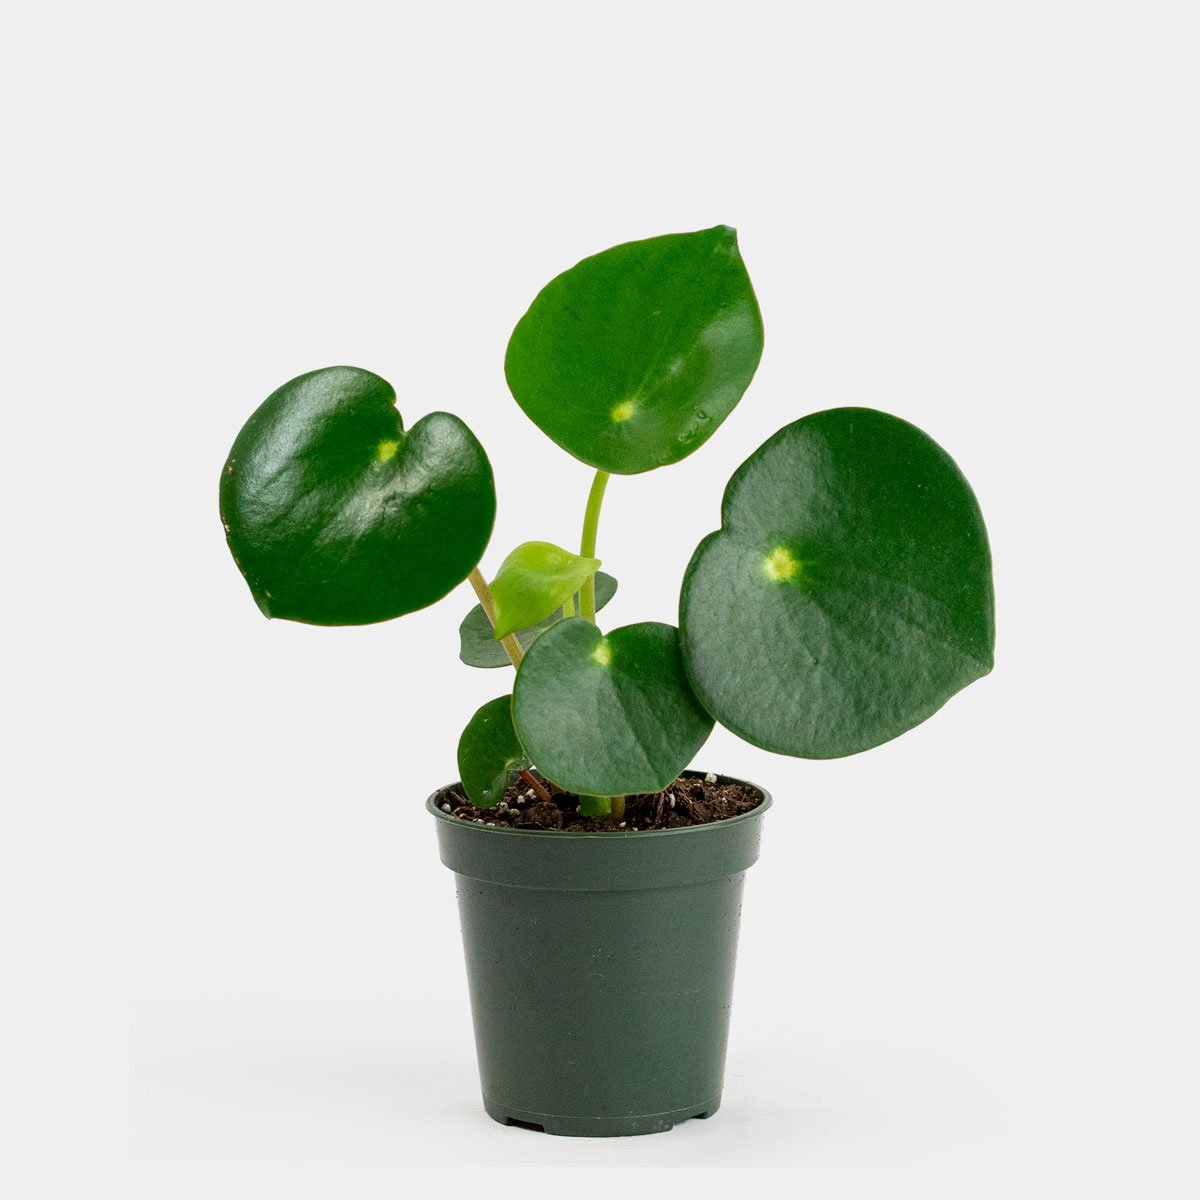 The leaves of this Peperomia are concave and heart shaped. They are vibrant green with a bright green spot at the base. 